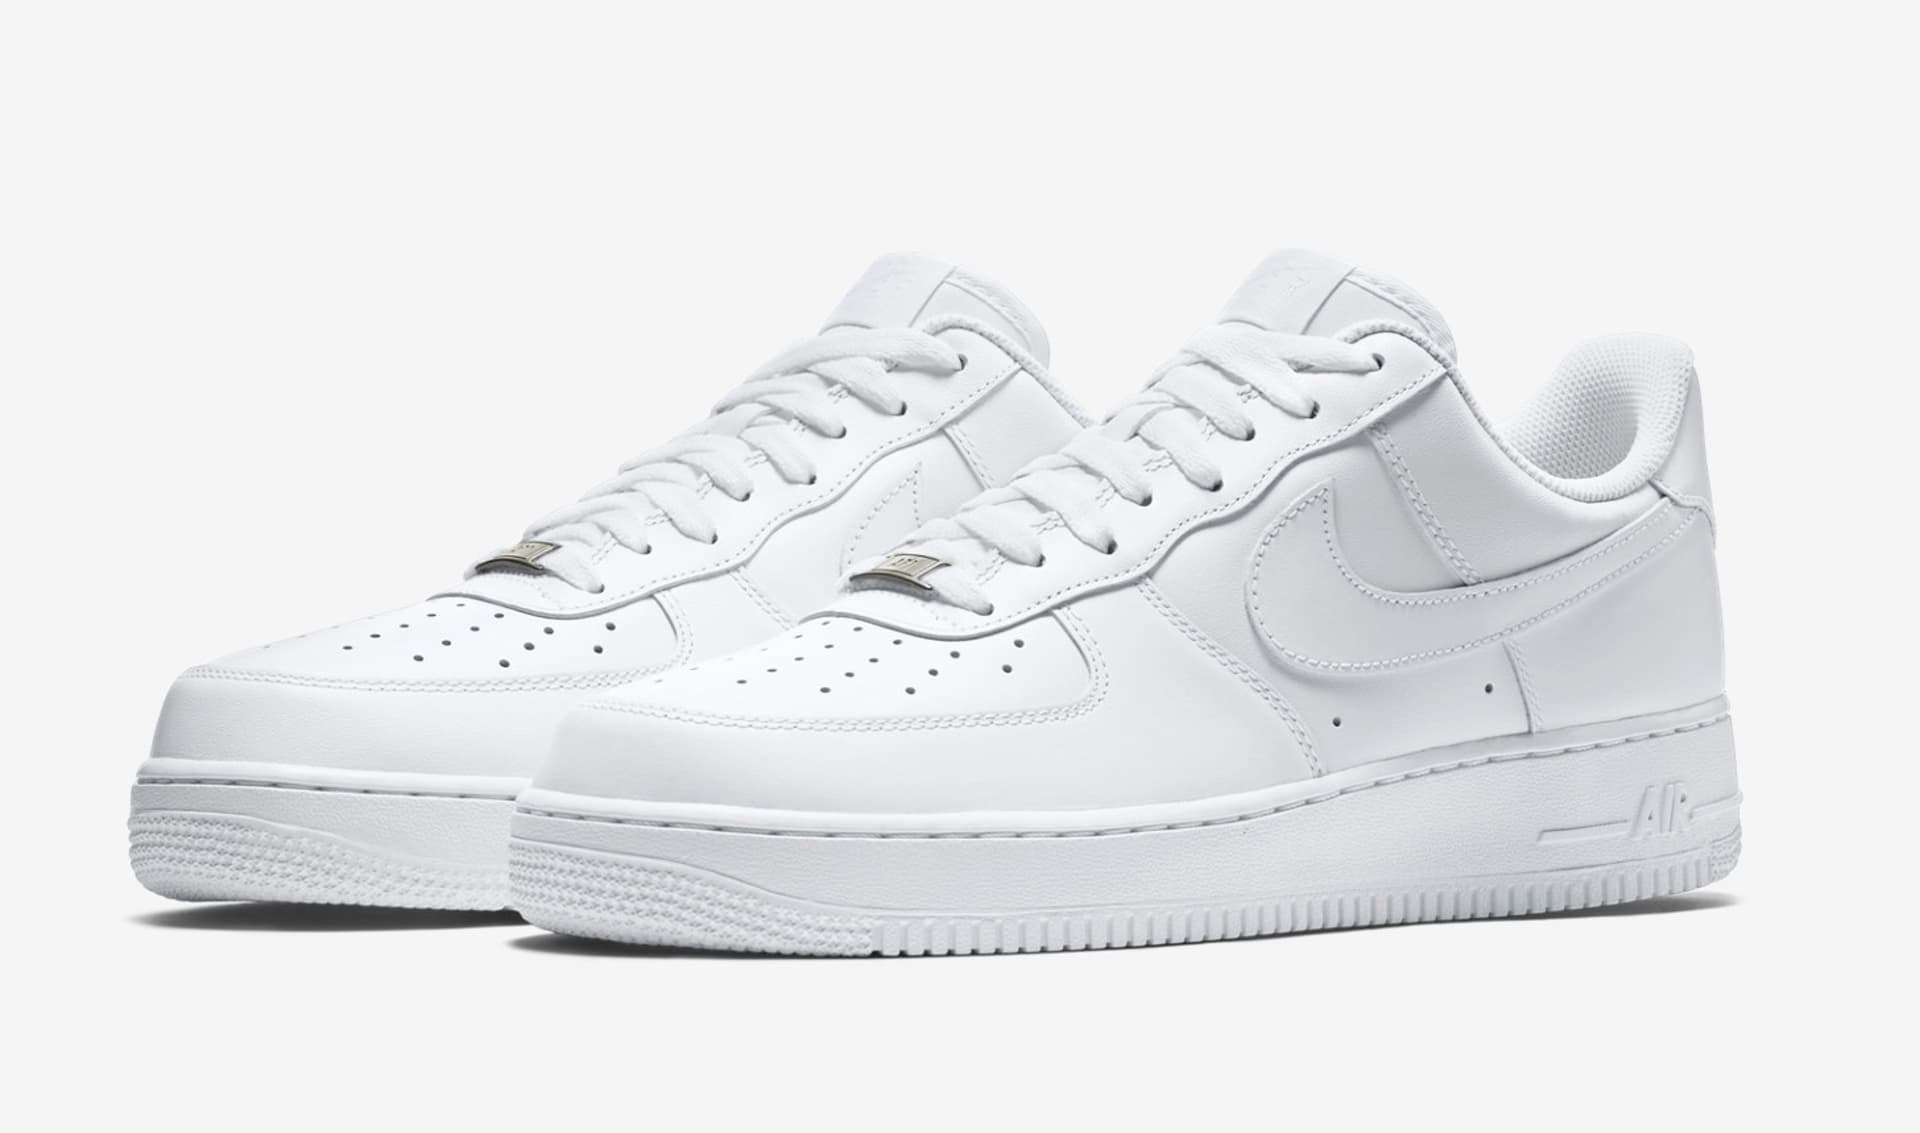 Revocation fertilizer Melodious Nike Air Force 1: History Behind The Perfect White Sneaker | Complex